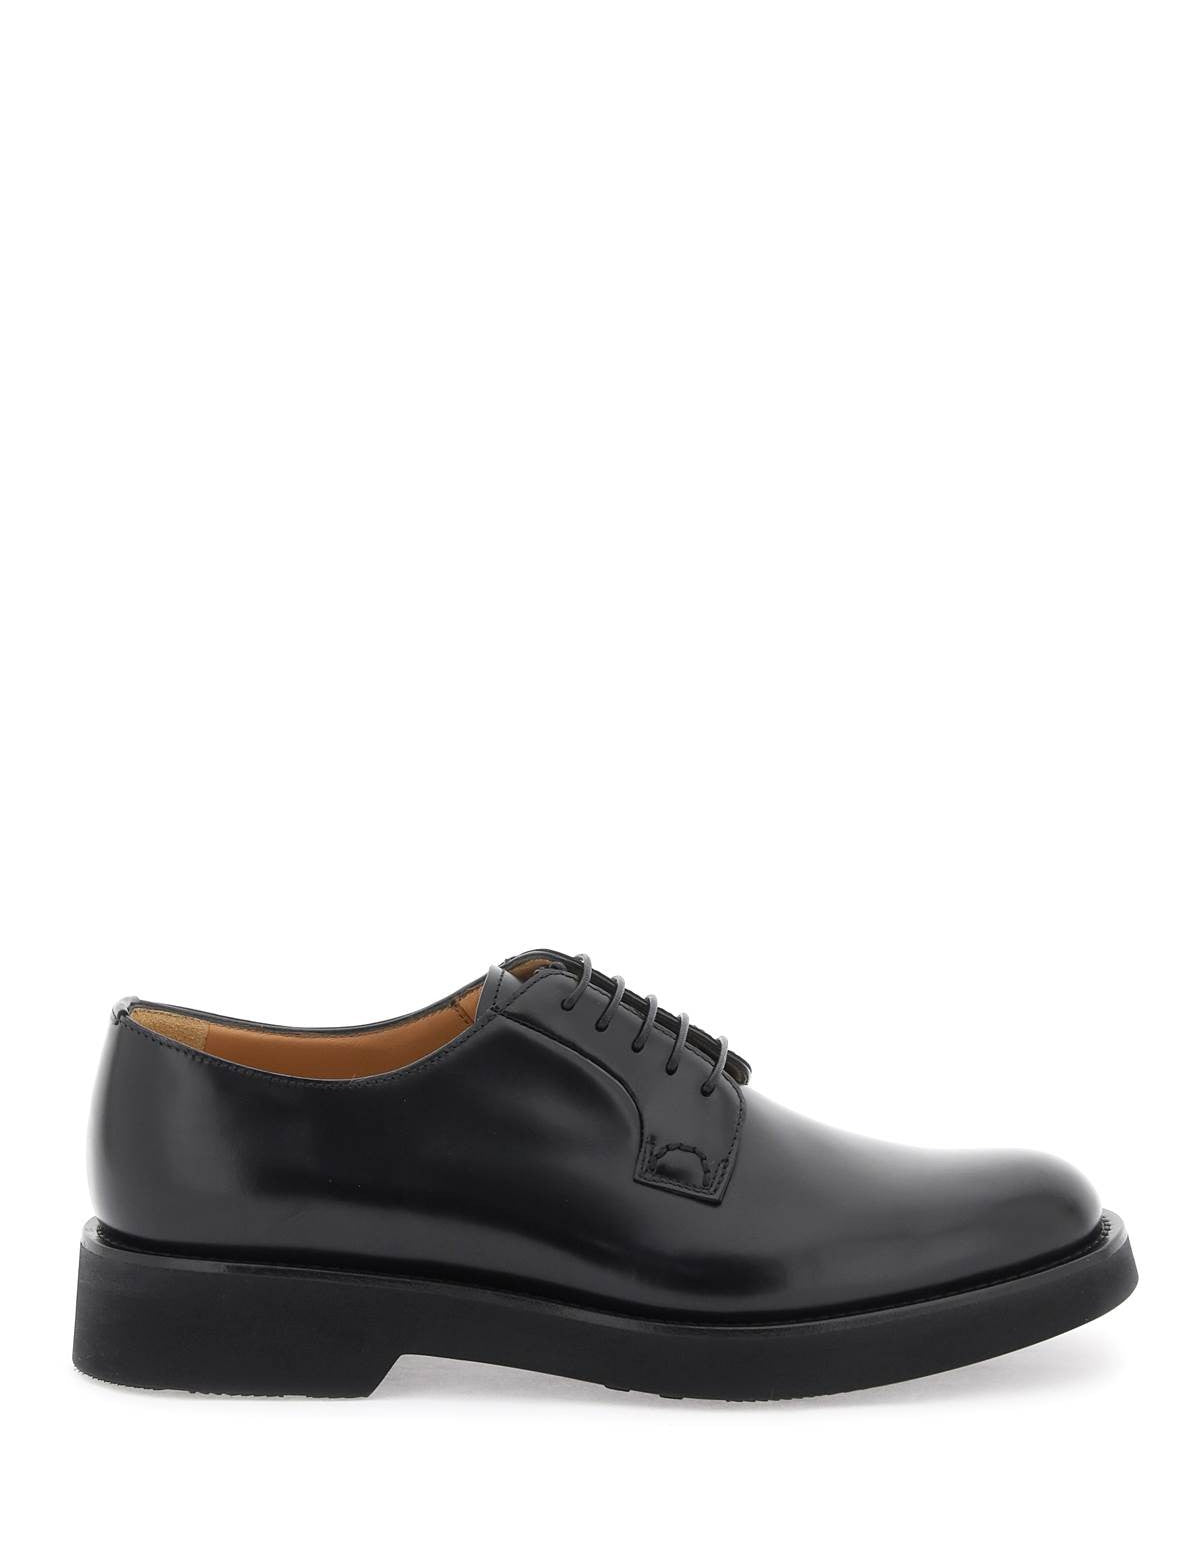 church-s-leather-shannon-derby-shoes.jpg